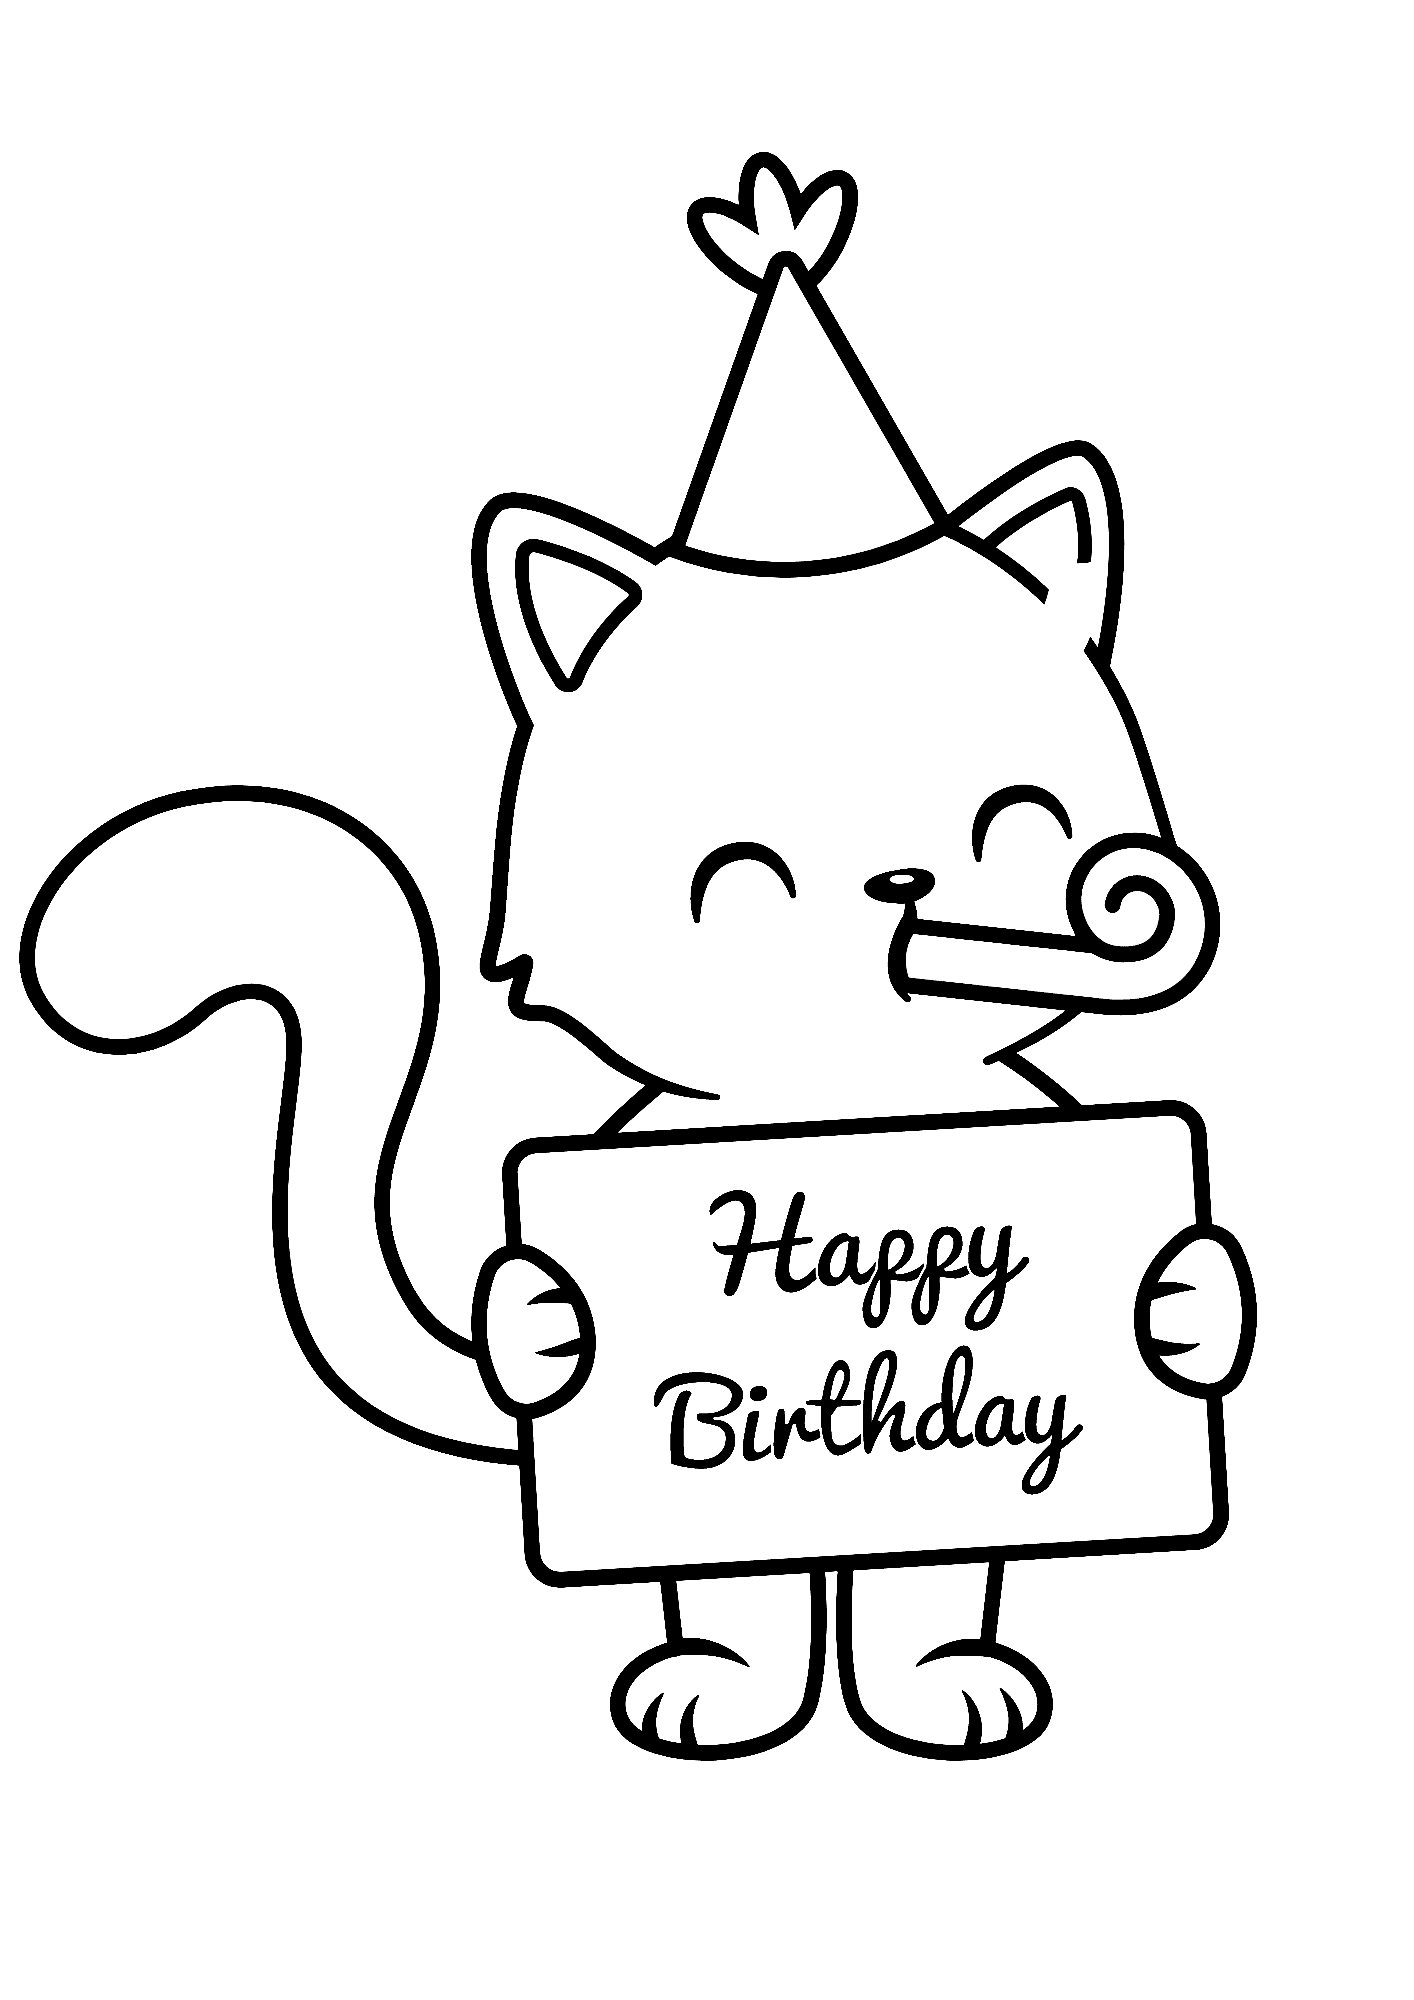 Happy Birthday Cat Images Coloring Page